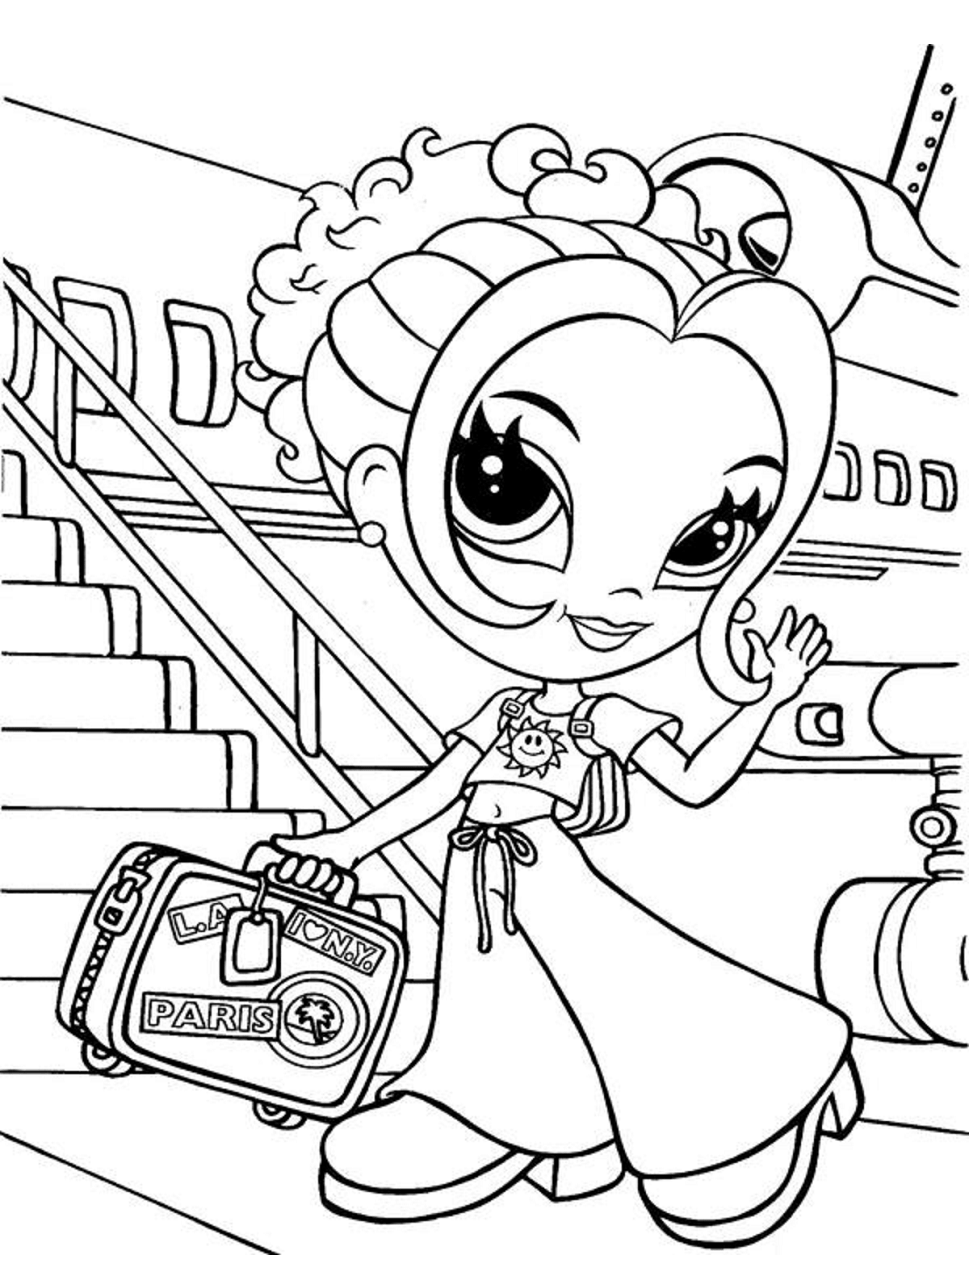 Glamour Girl Travelling Coloring Page - Free Printable Coloring Pages